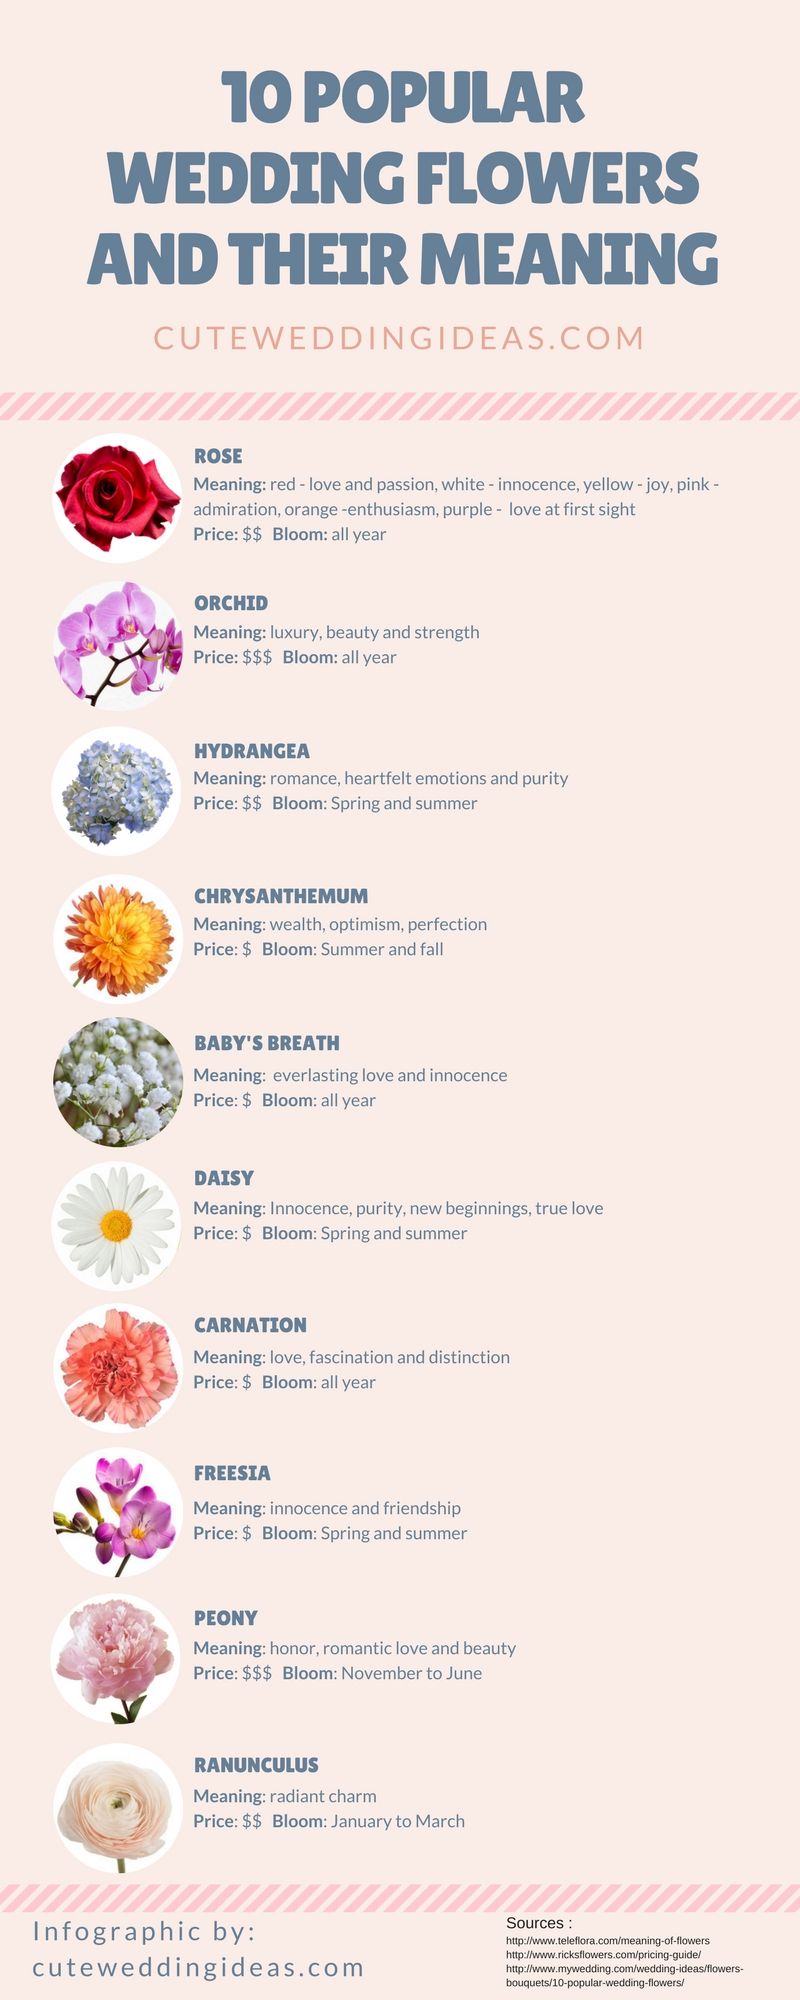 10 Popular Wedding Flowers and Their Meaning